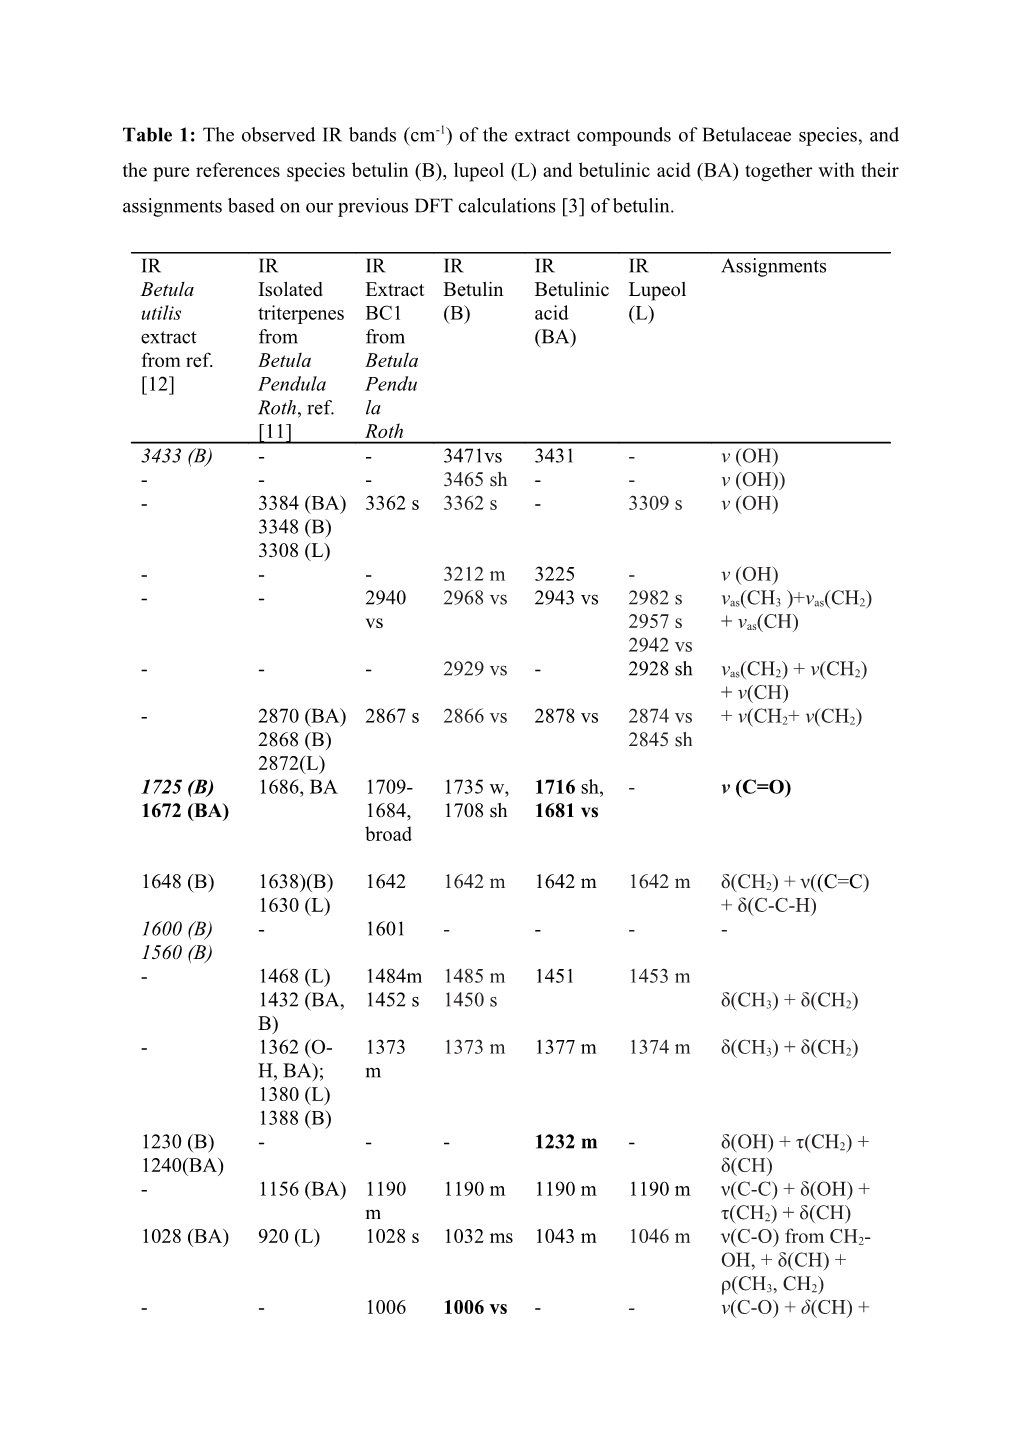 Table 1: the Observed IR Bands (Cm-1) of the Extract Compounds of Betulaceae Species, And